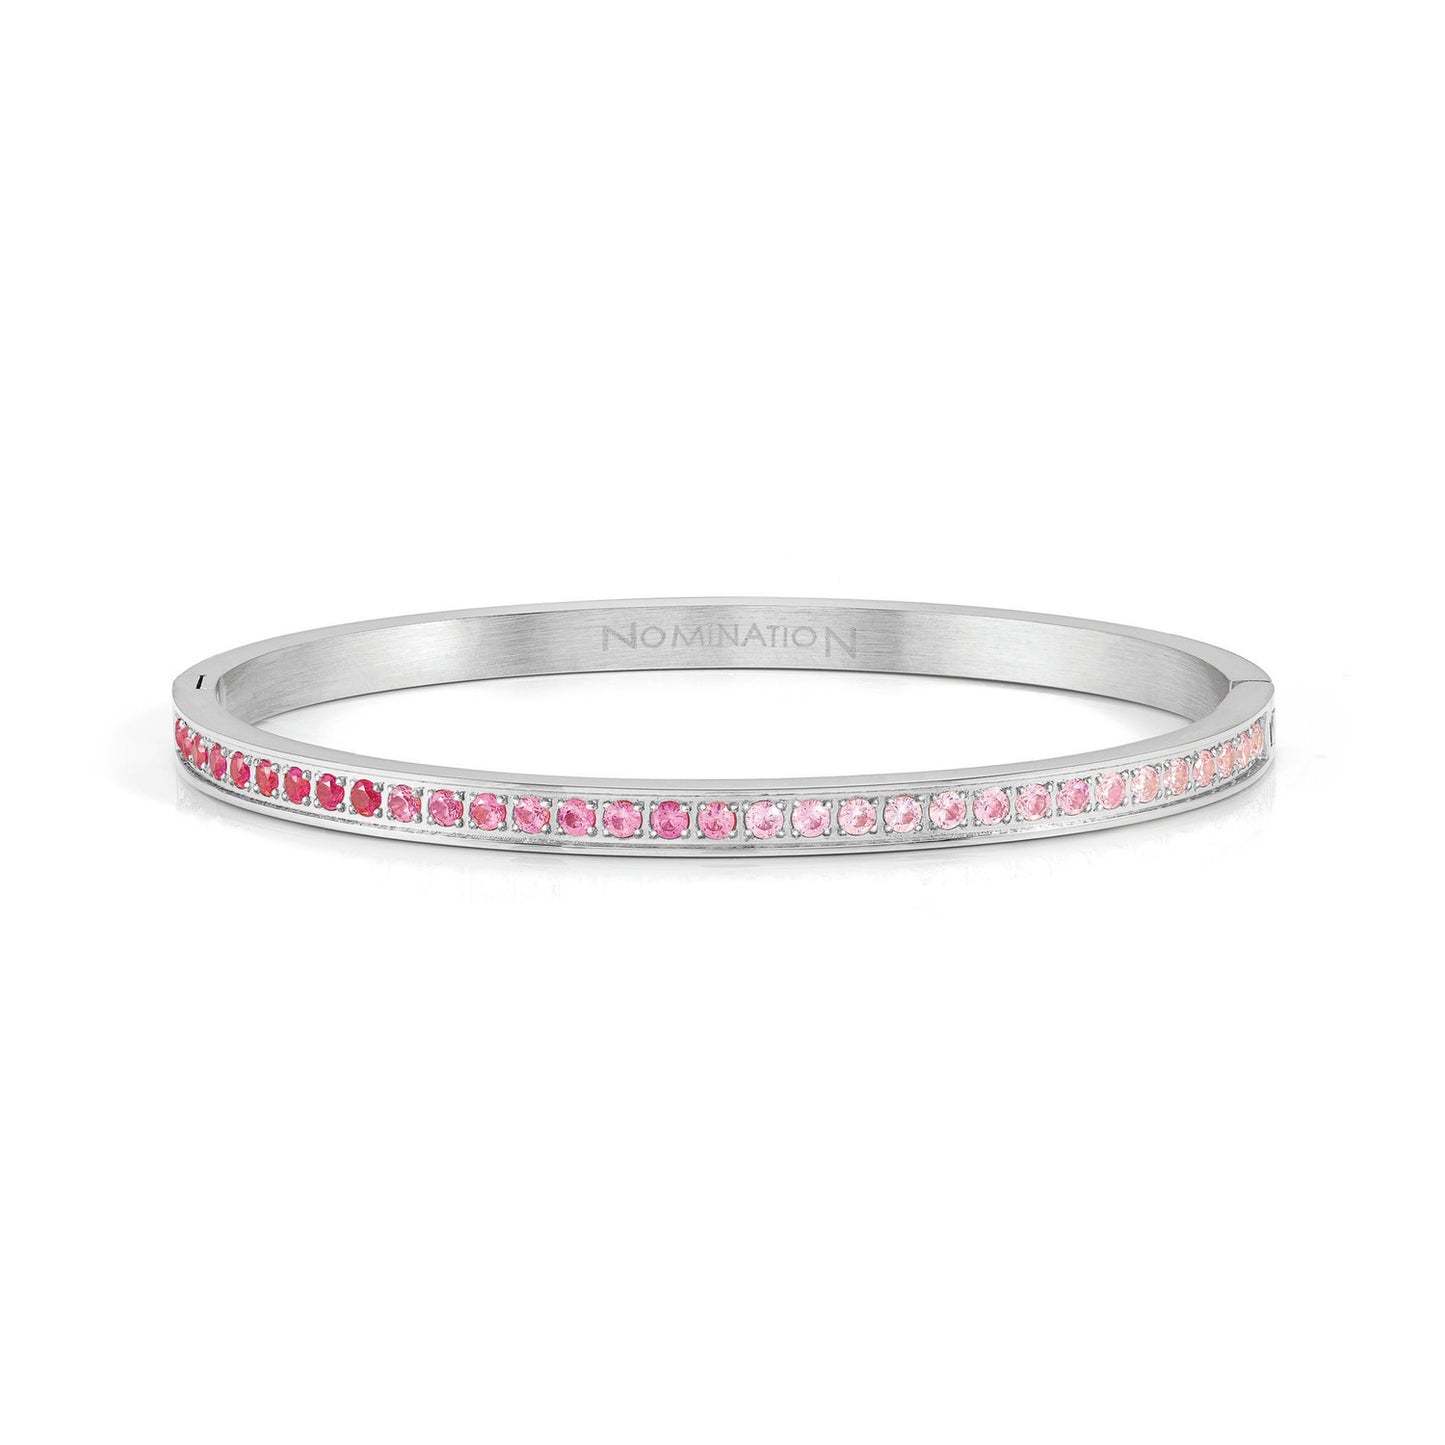 029506/002 PRETTY BANGLES bracelet in steel and cz (SIZE LARGE) (002_PINK)